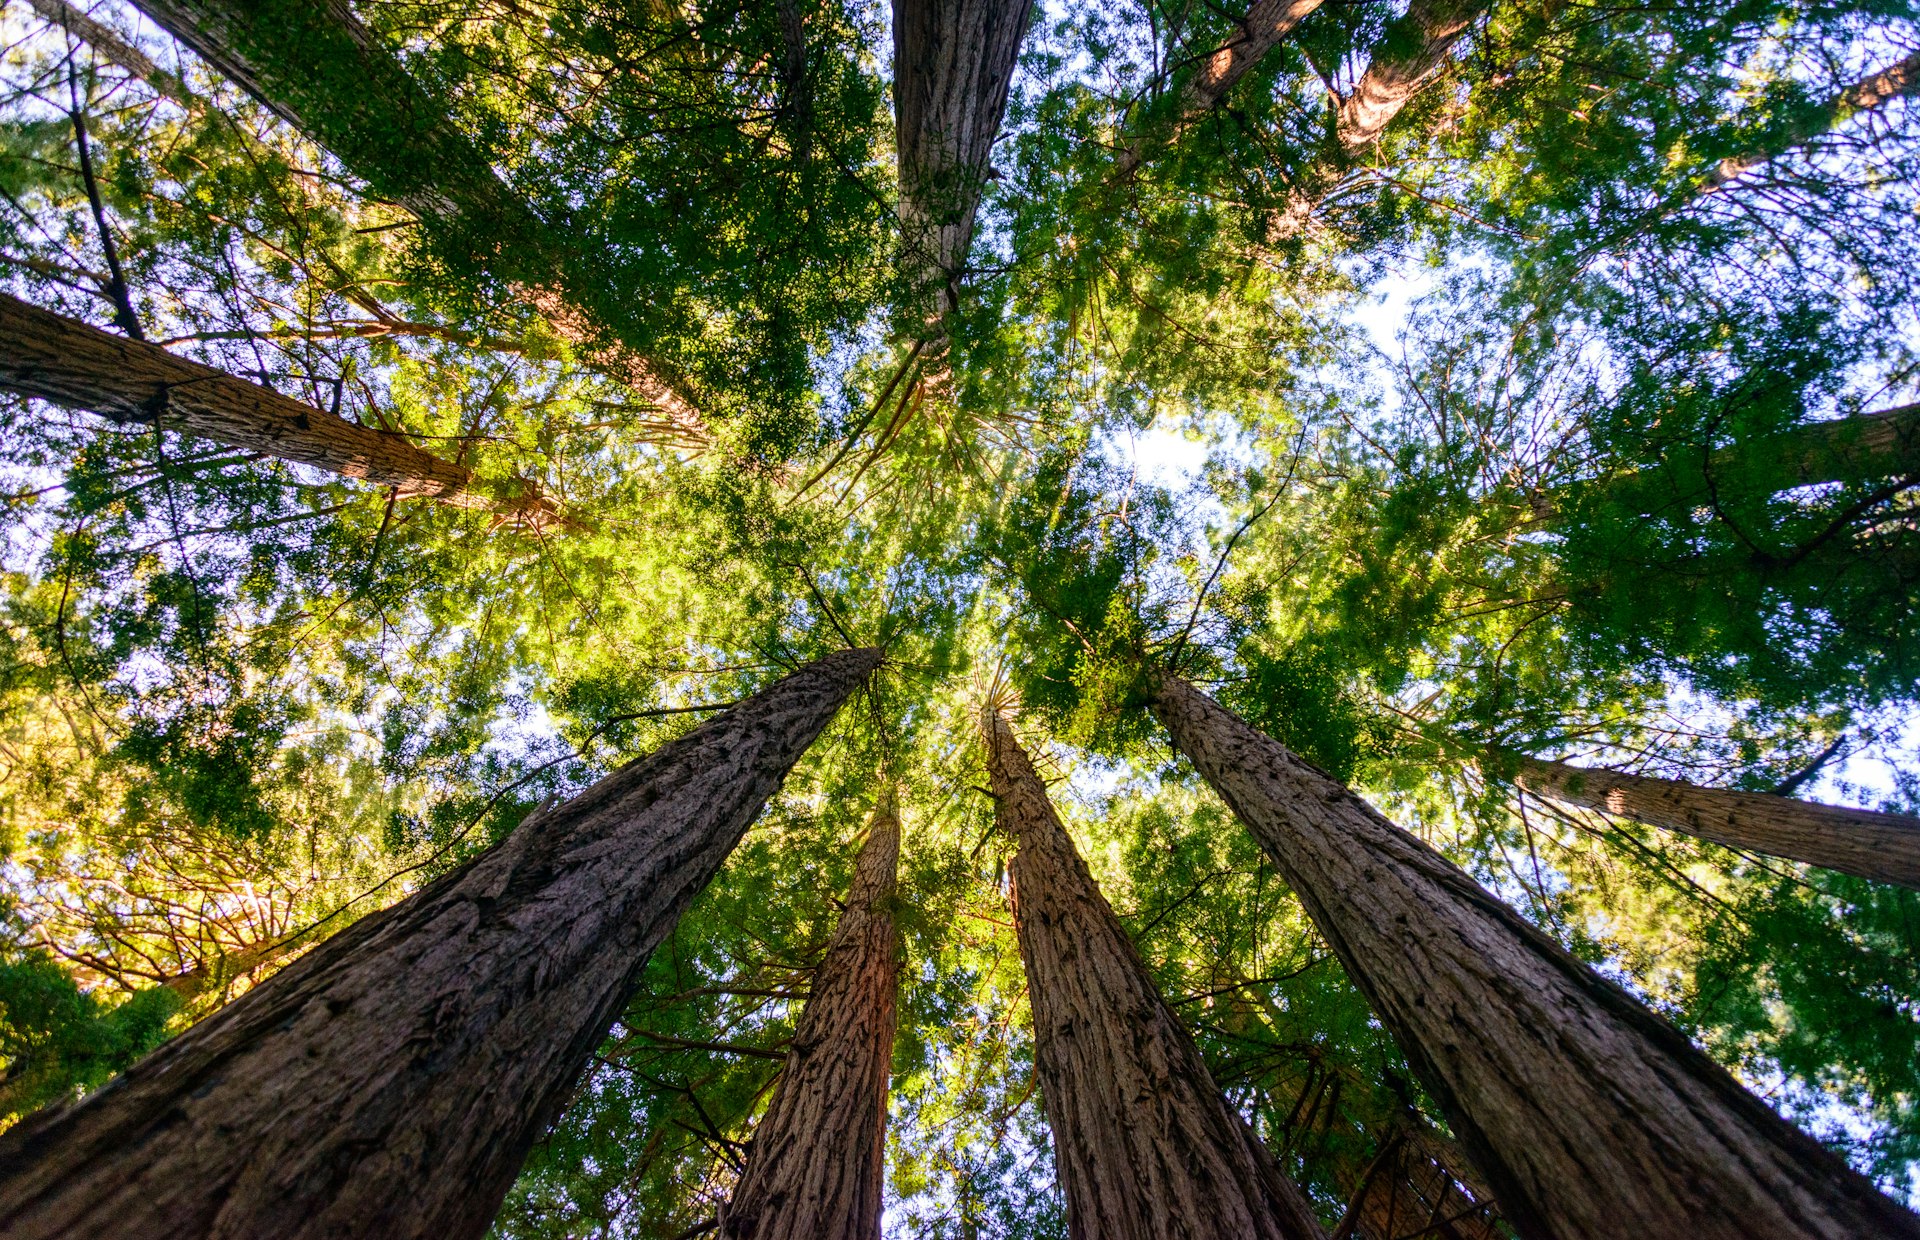 Trees in Muir Woods National Monument, Marin County, California, USA